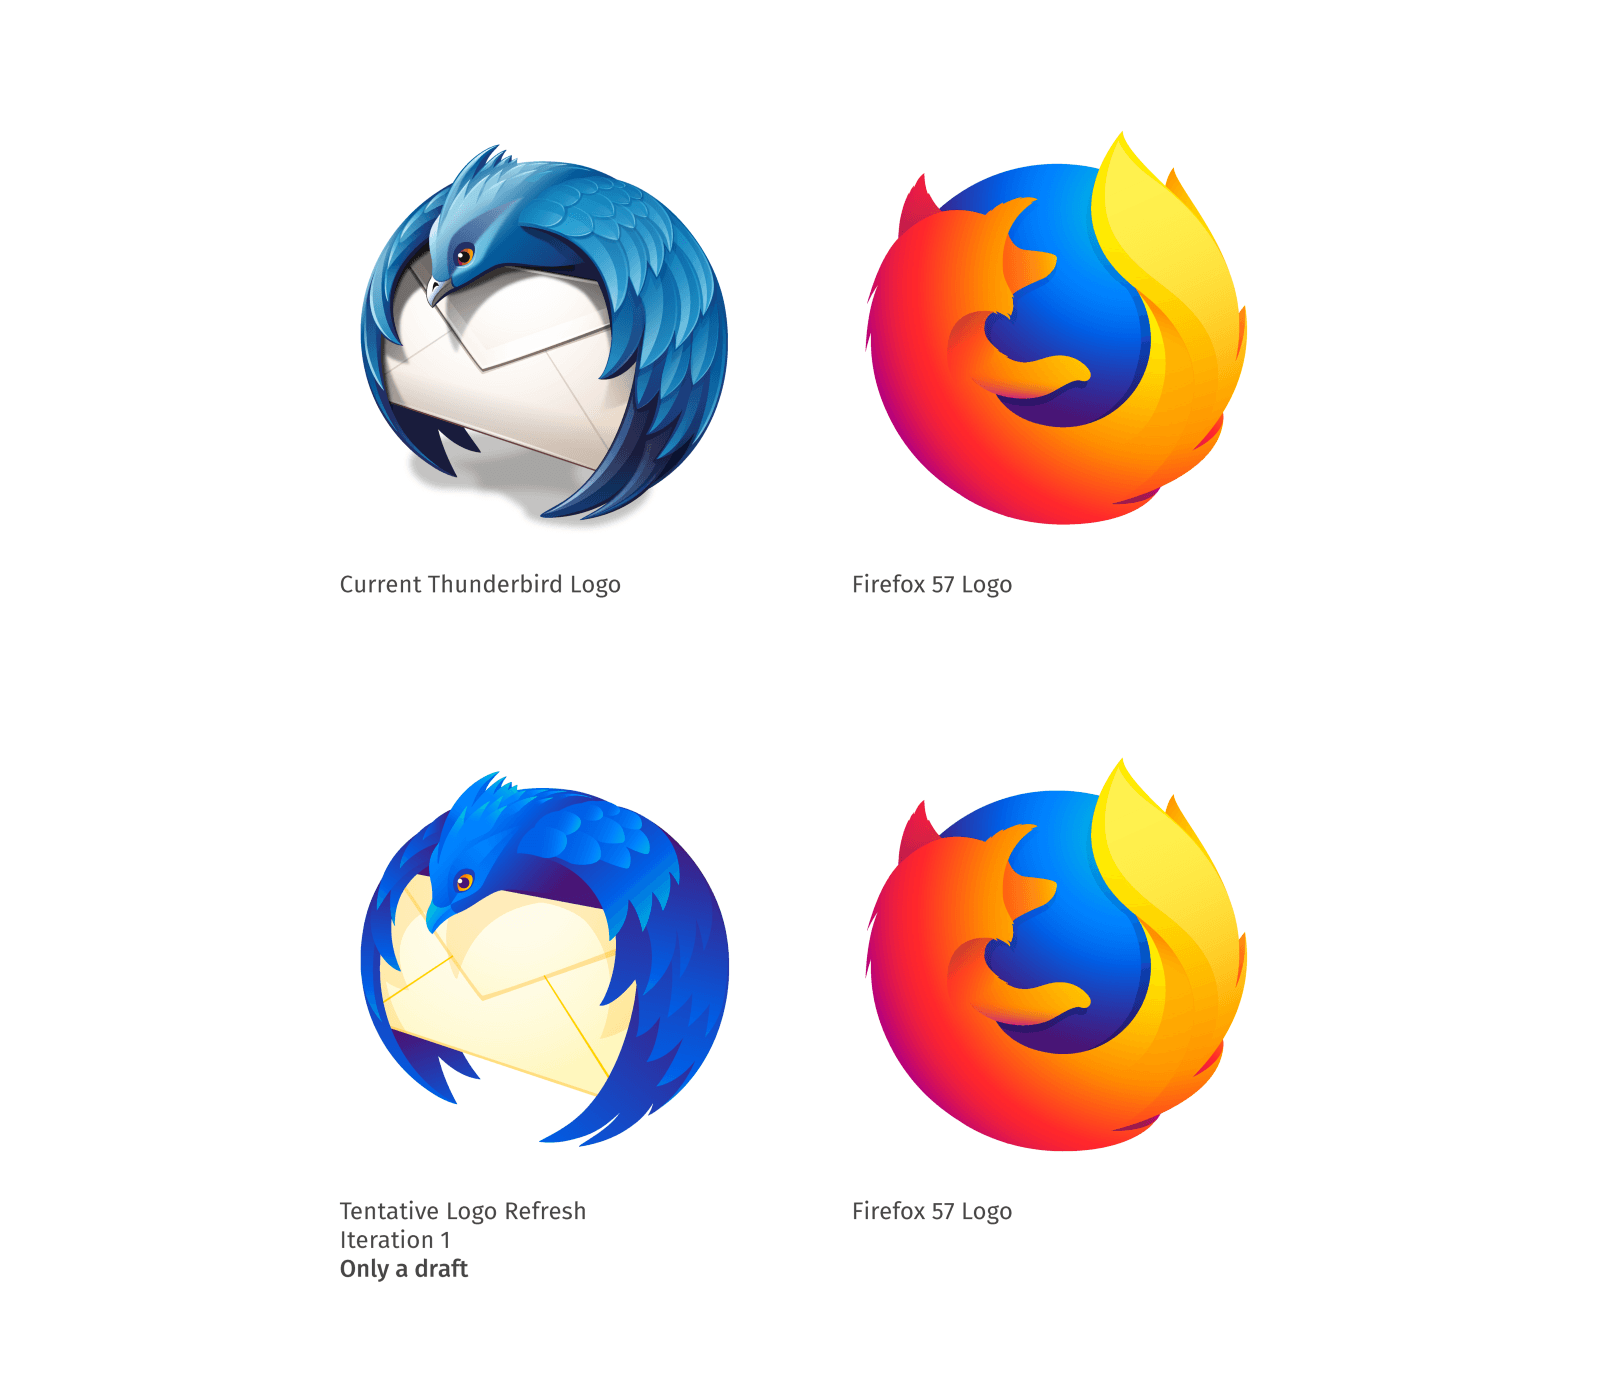 Firefox Old Logo - Is this the new Thunderbird Logo? And Other Design Ideas for ...